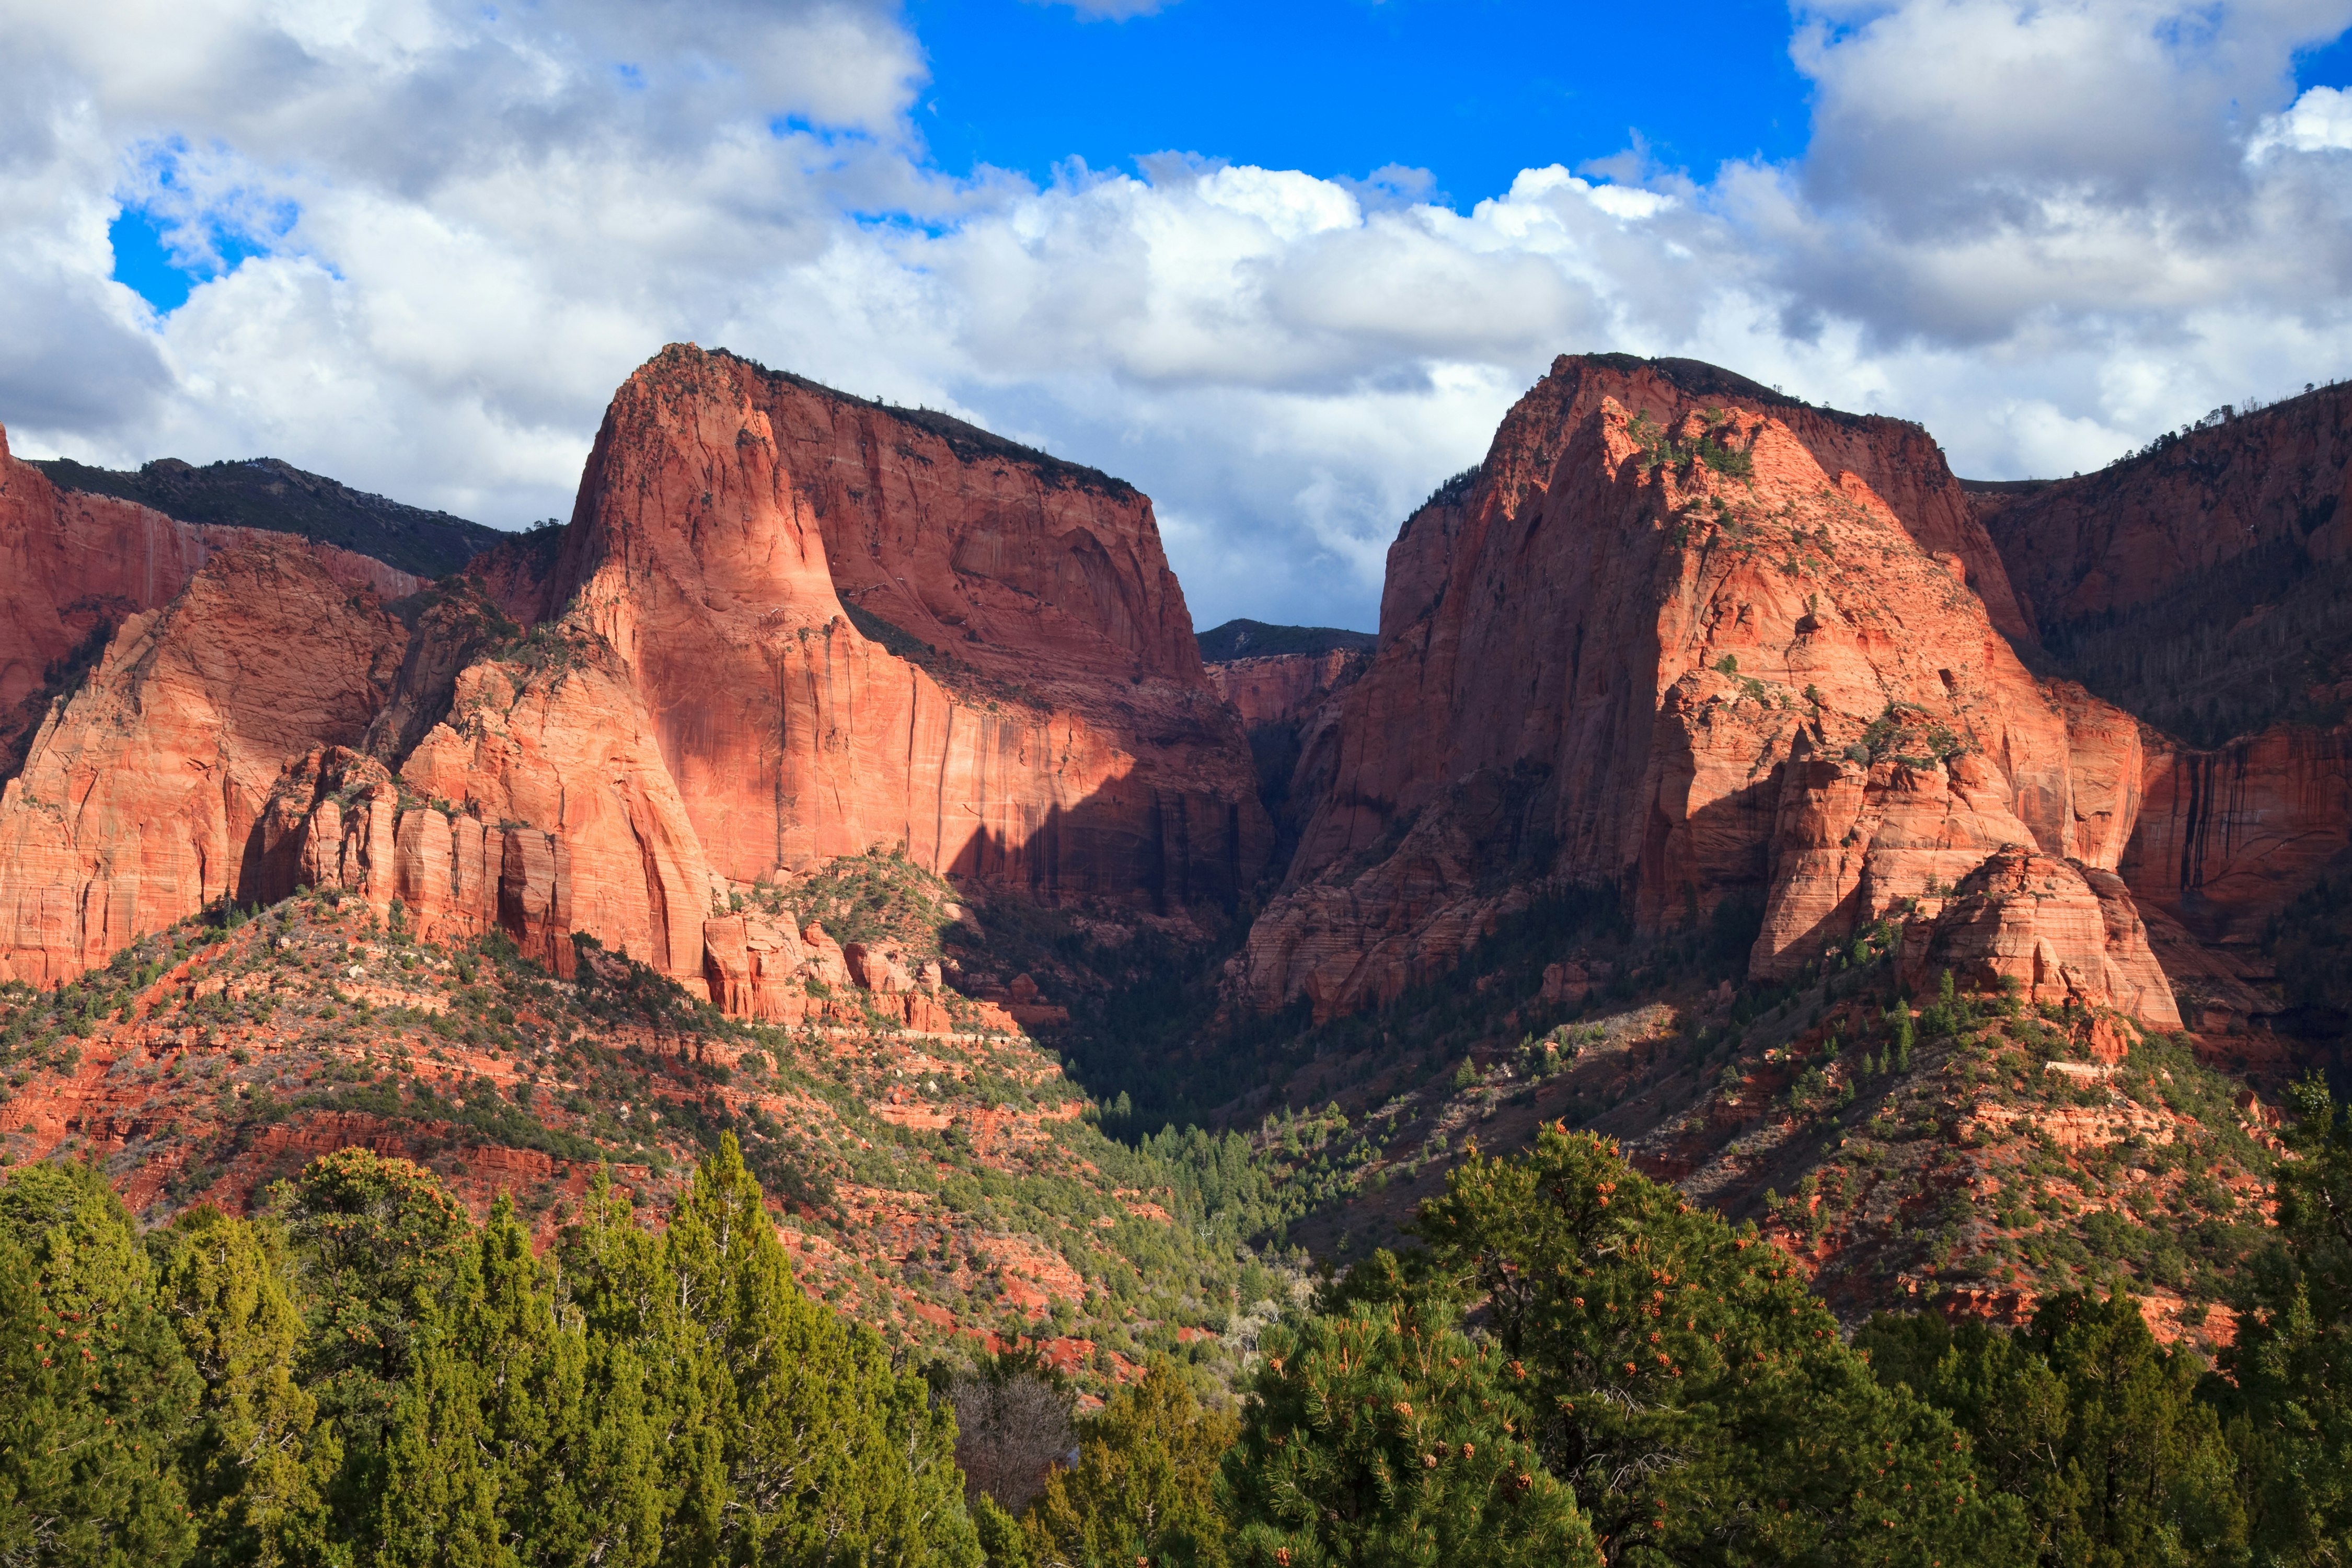 A red-rock mountain, with green trees below and blue skies above